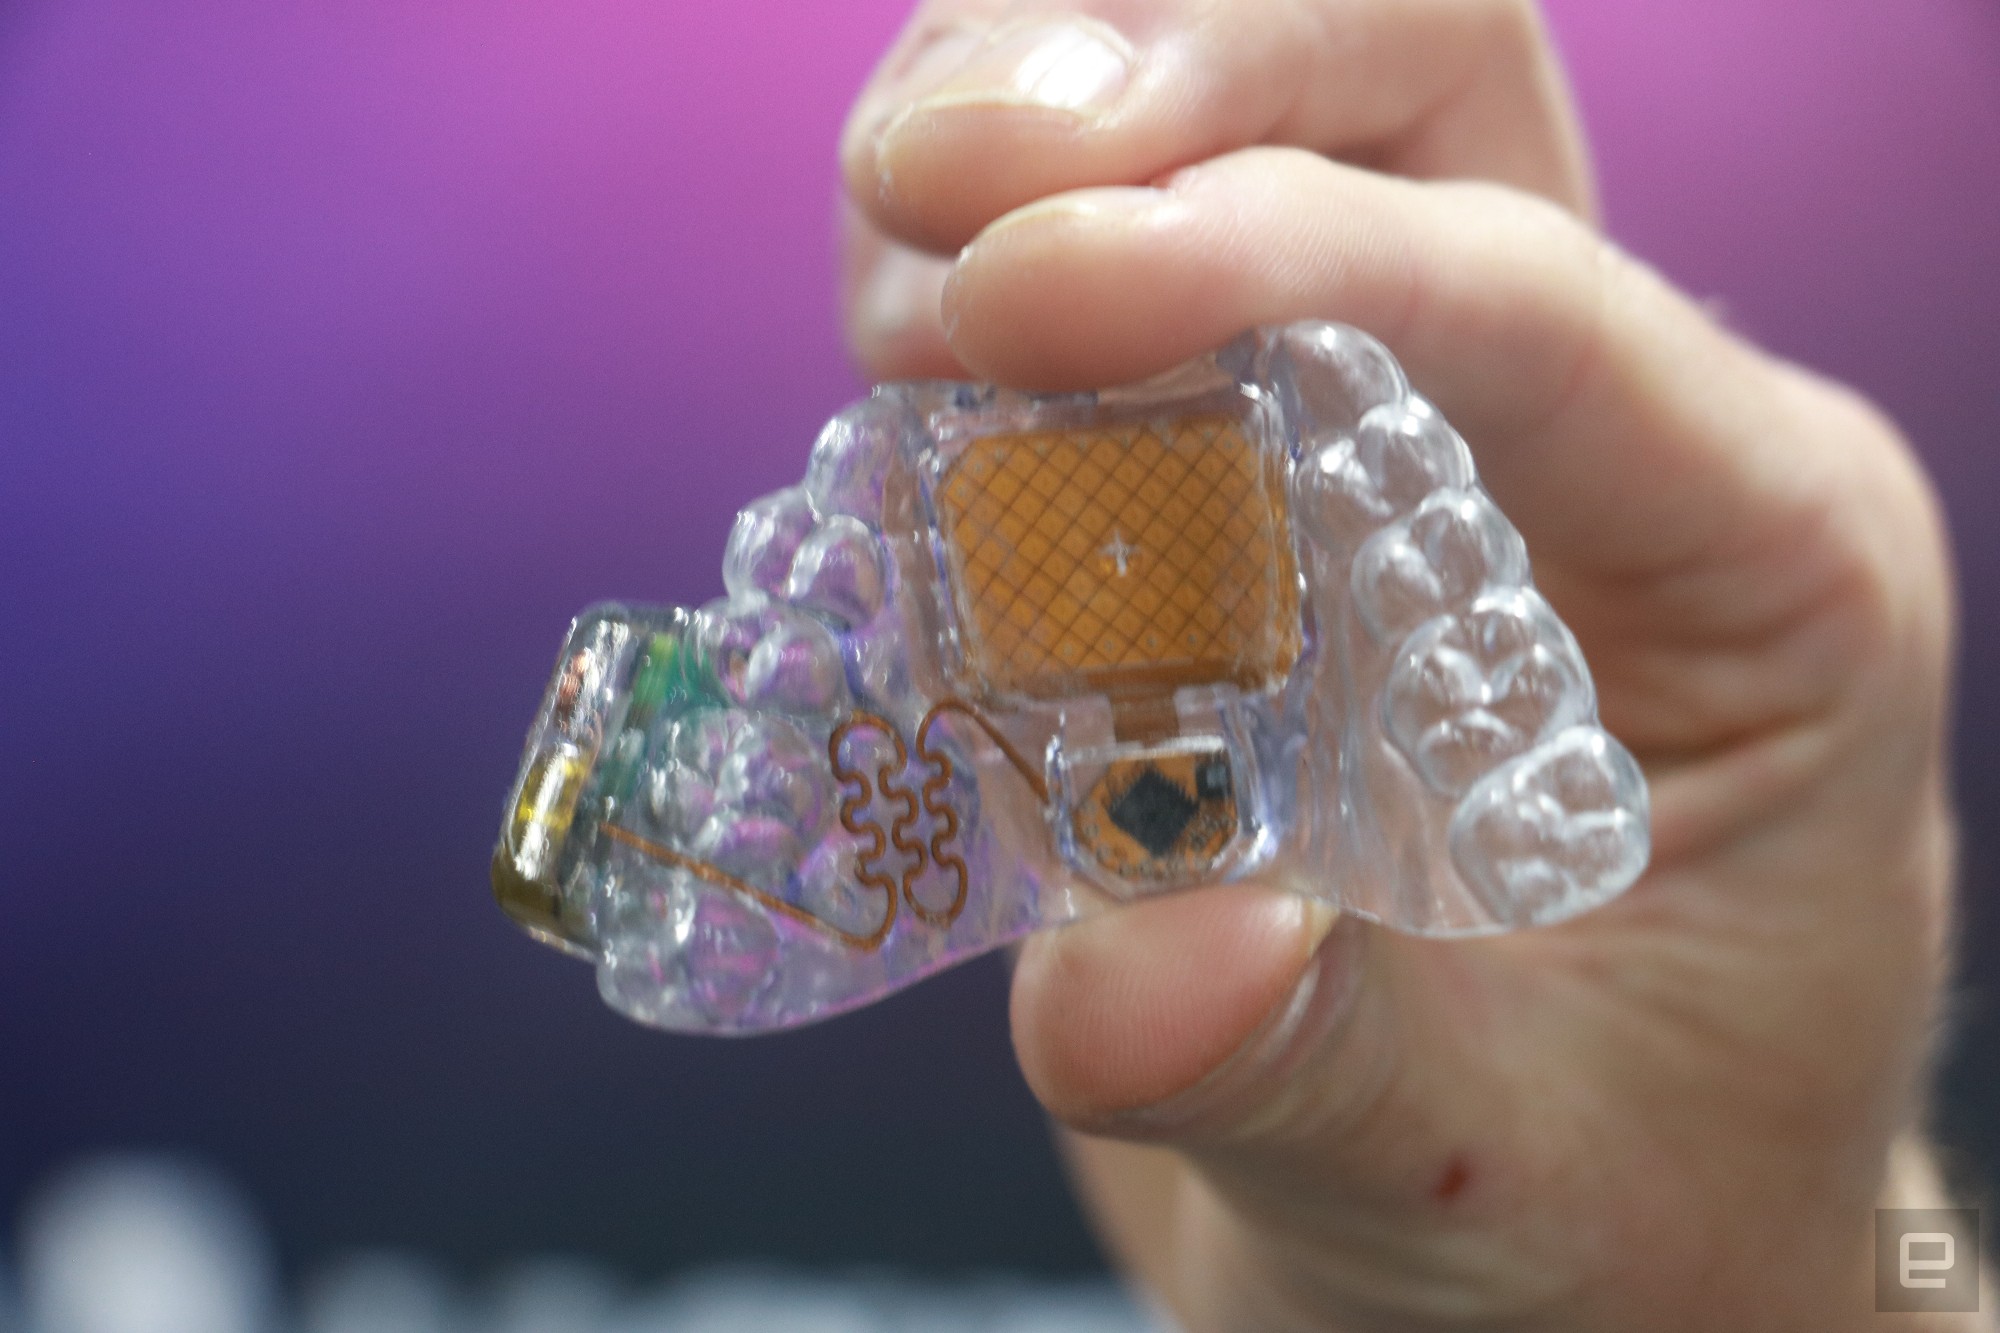 The MouthPad is a tongue-operated controller that hangs in mid-air. It's a clear dental tray with an orange touchpad in the middle and some circuitry here and there.